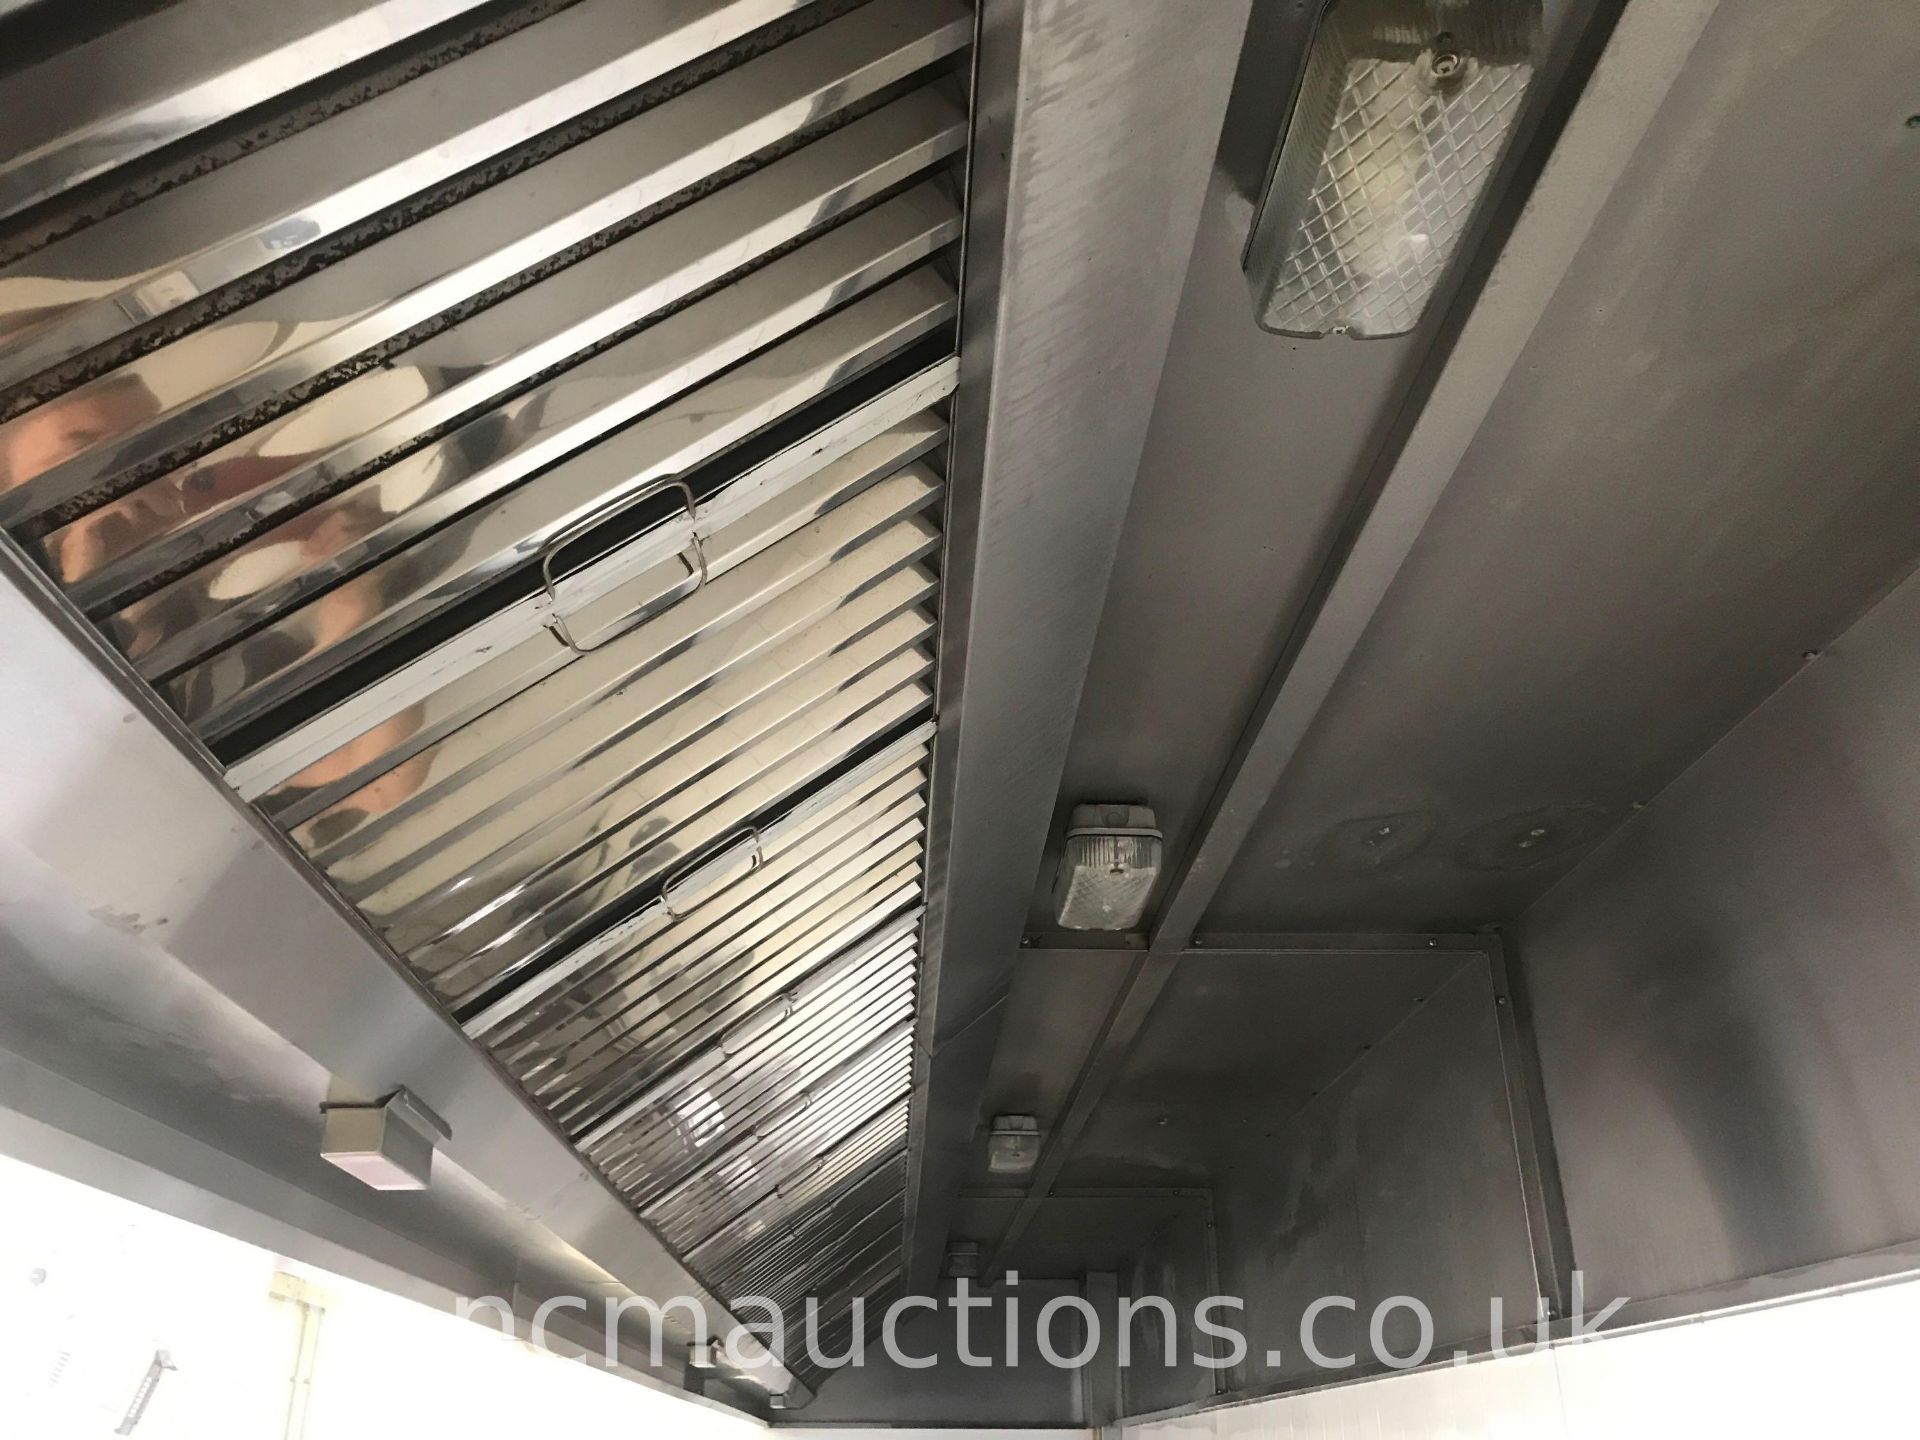 Stainless Steel Ventilation System - Image 3 of 9